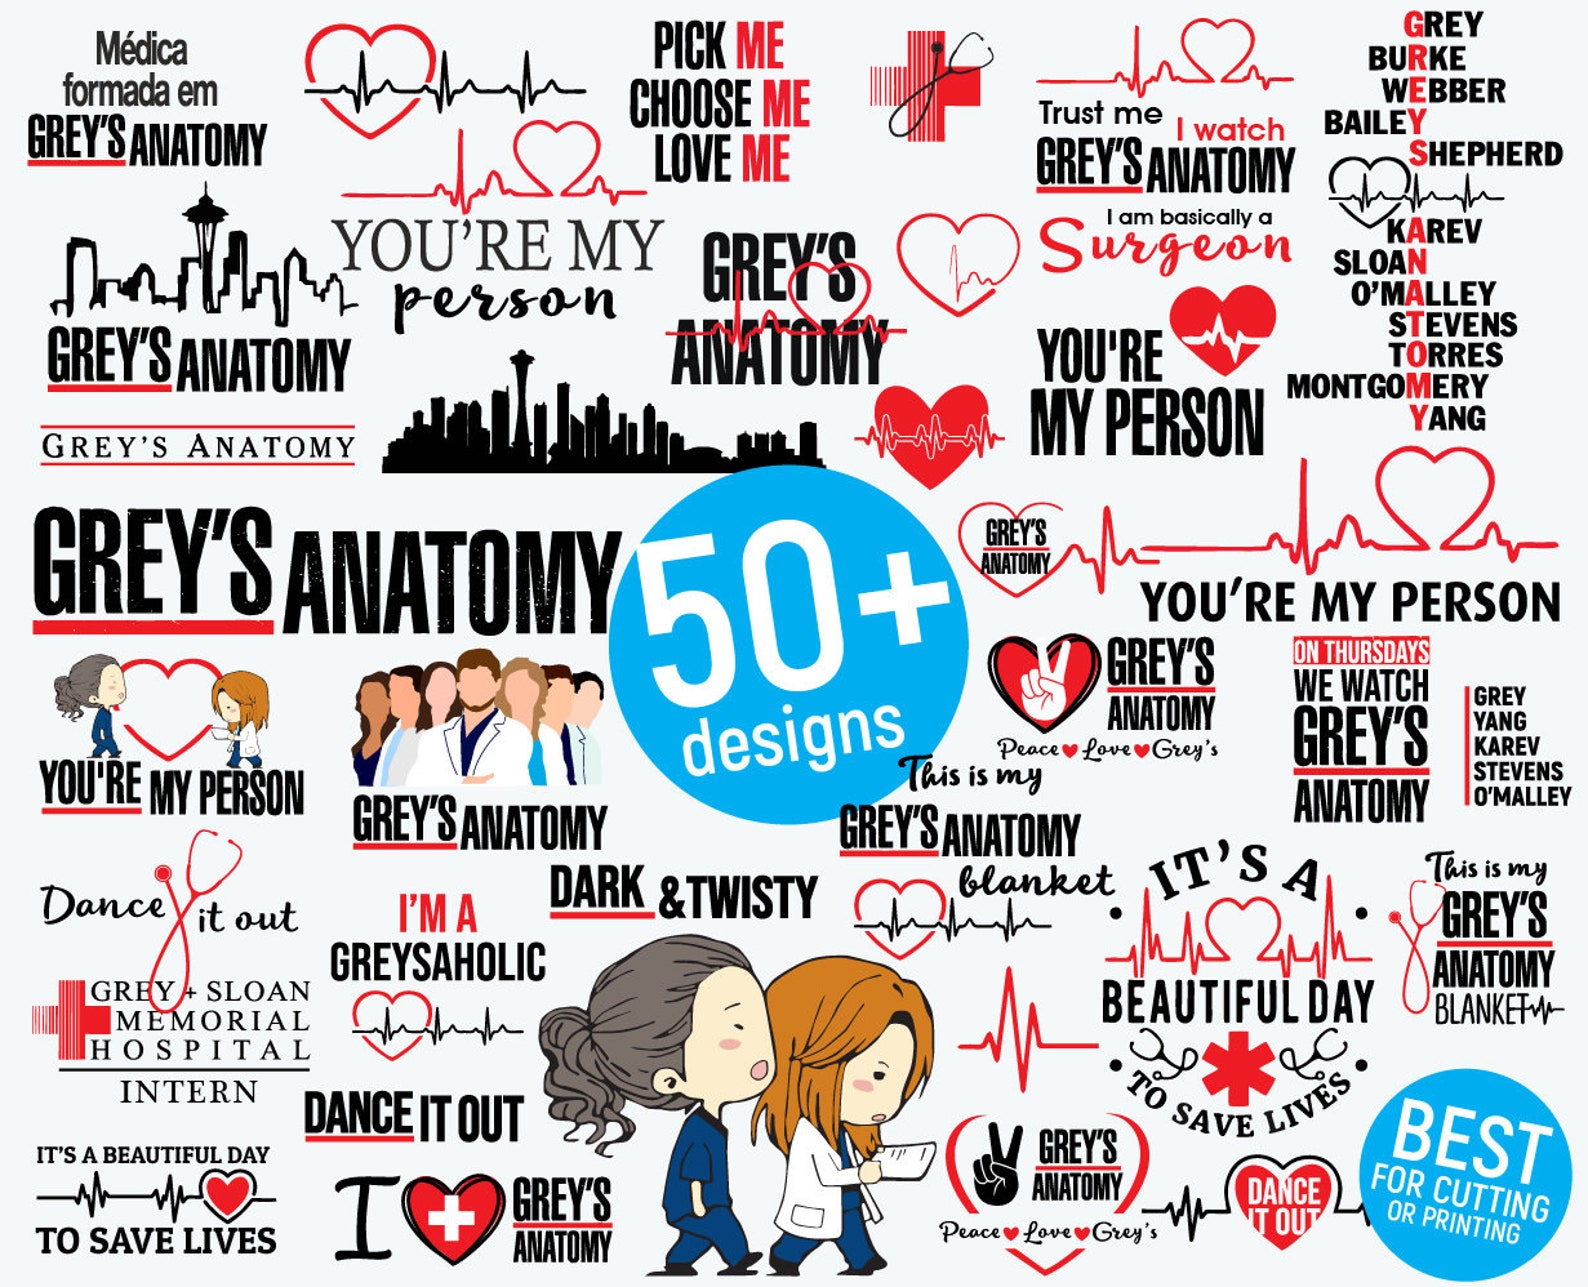 Grey's anatomy collection.